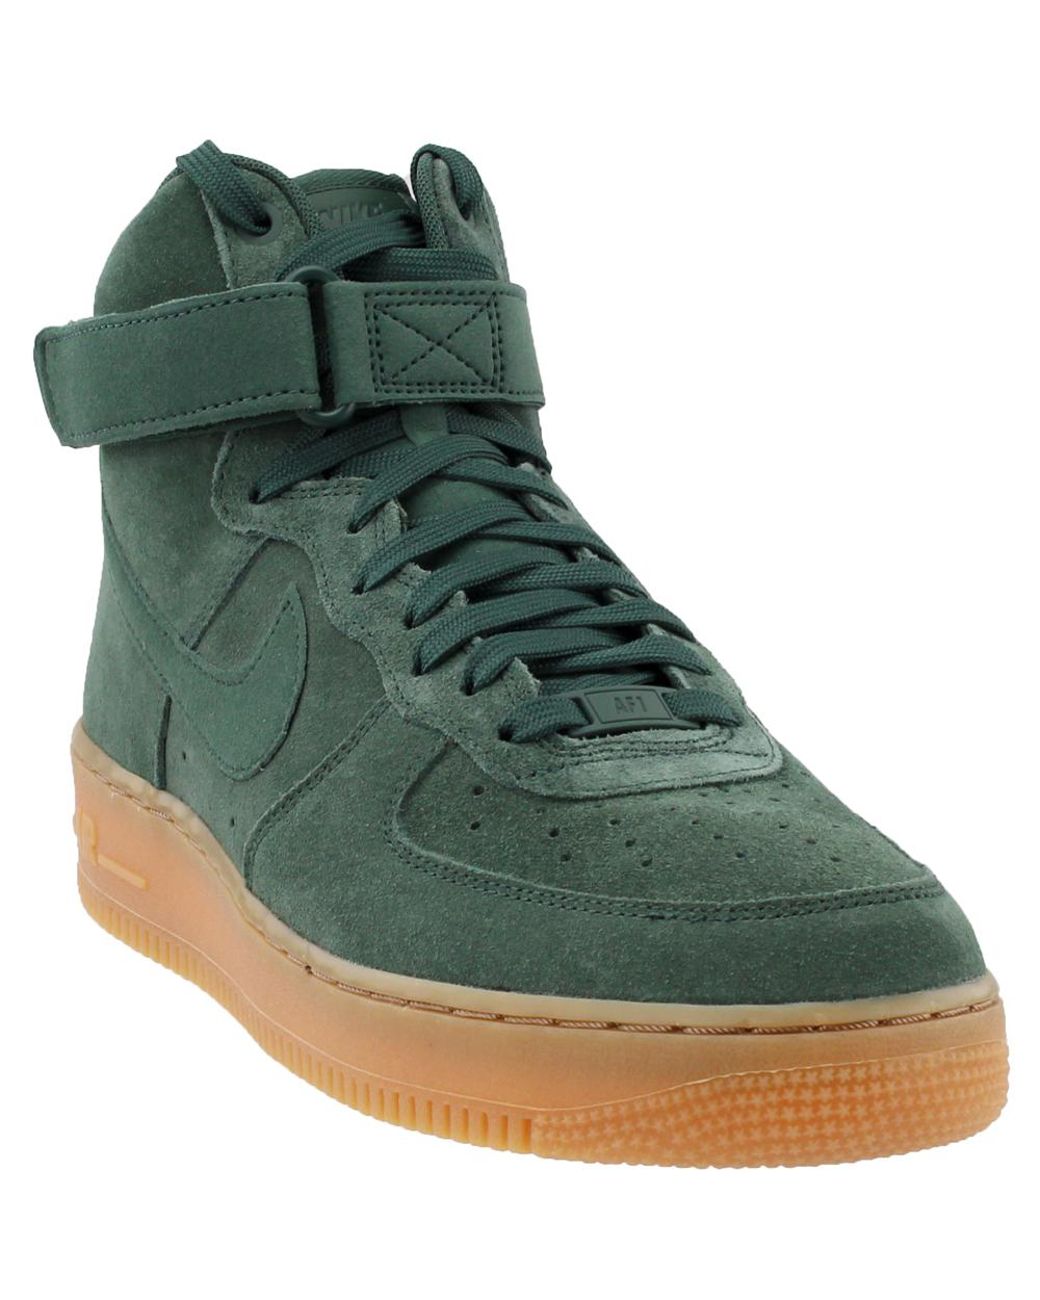 Nike Air Force 1 High 07 Lv8 Suede Vintage Green/vintage Green for 